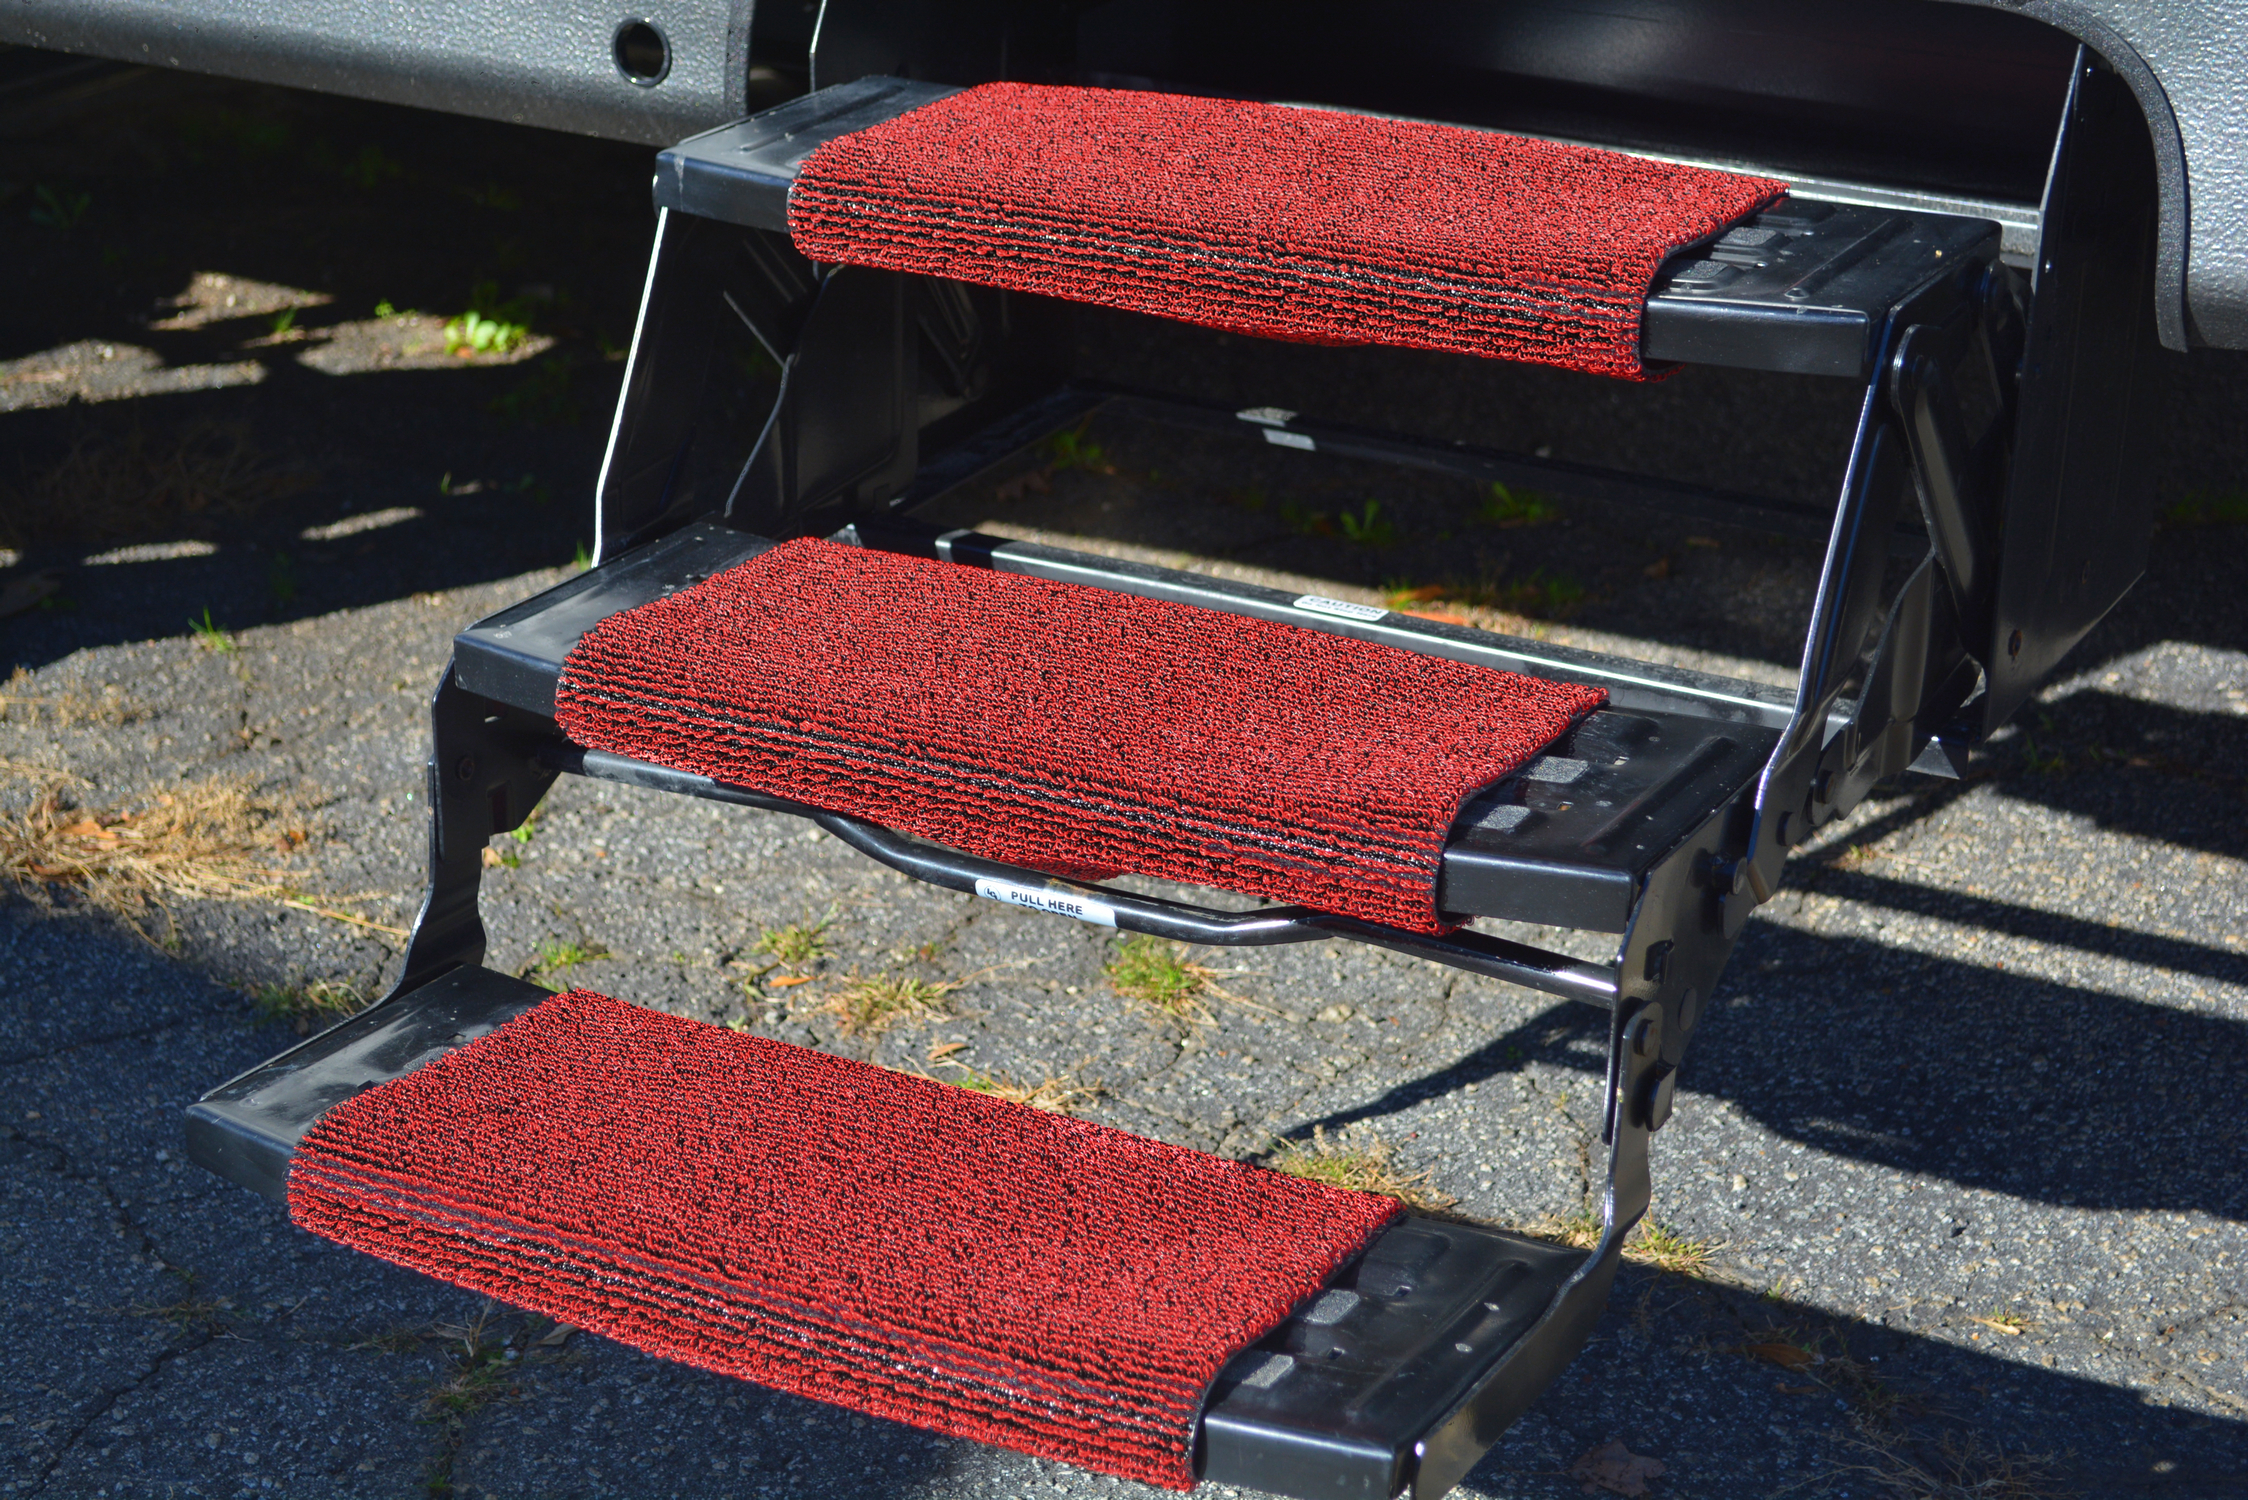 Grubby Feet Mats Durable Outdoor Mats RV and Camper Step Covers GG Step Covers Red/Black